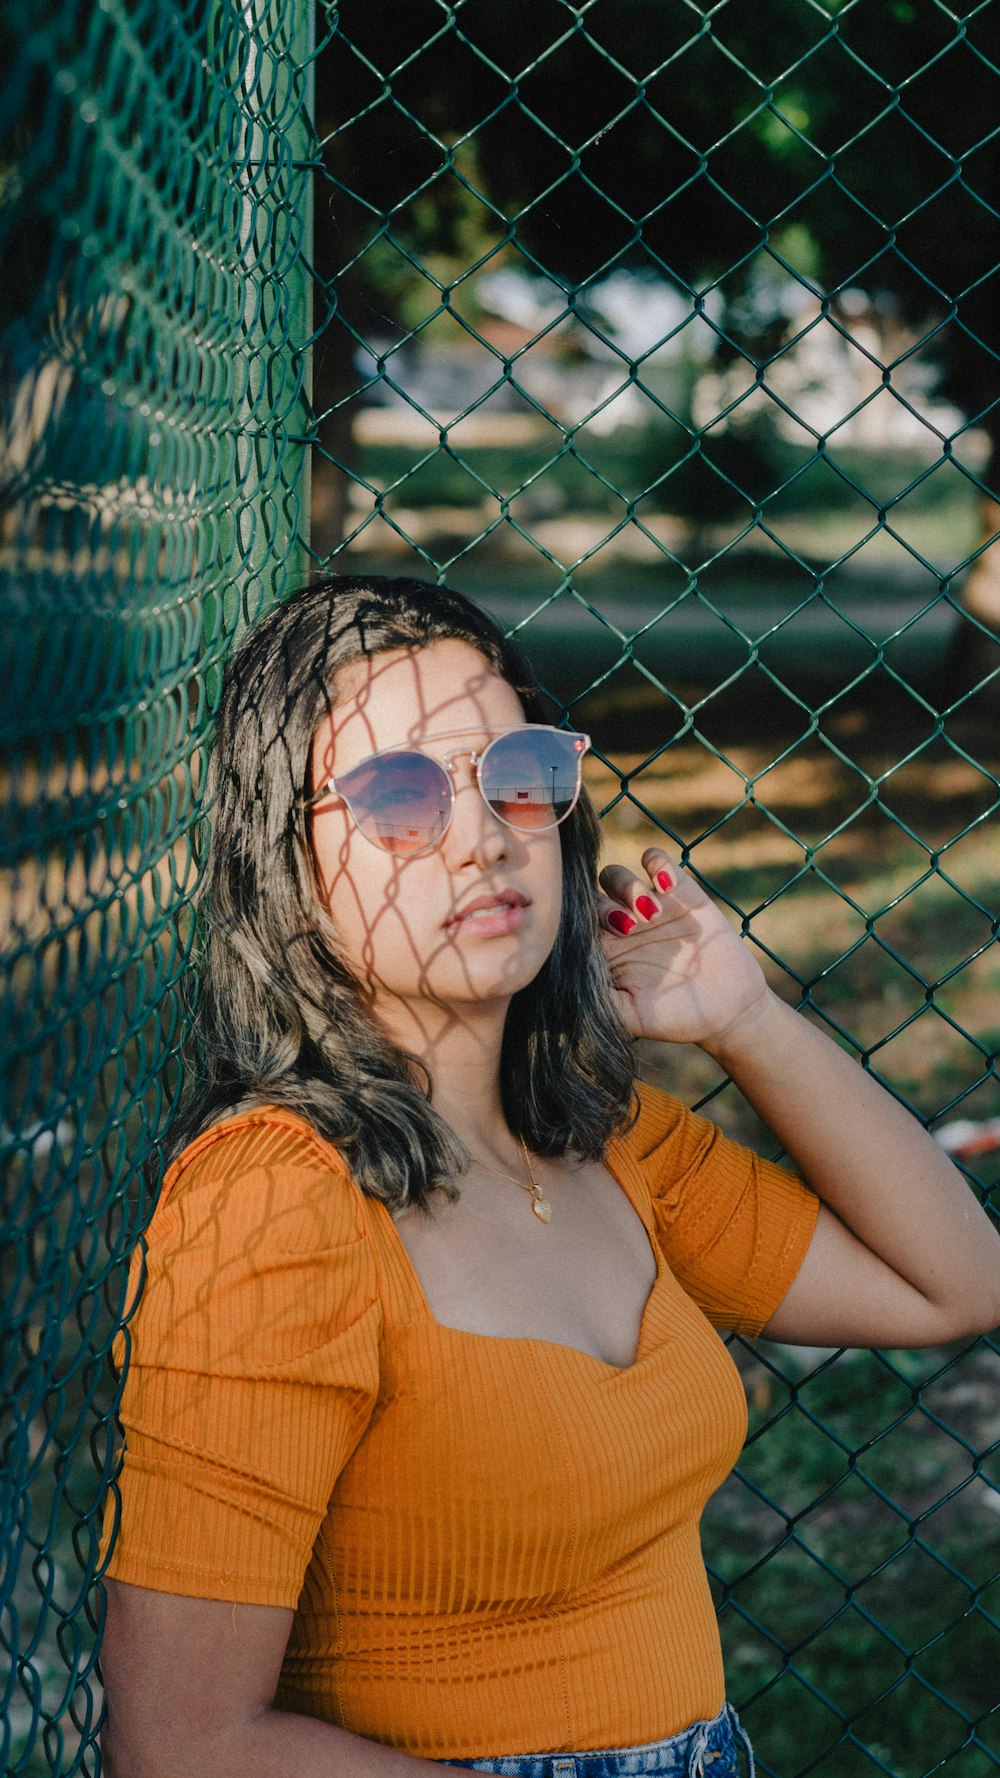 a woman leaning against a fence wearing sunglasses